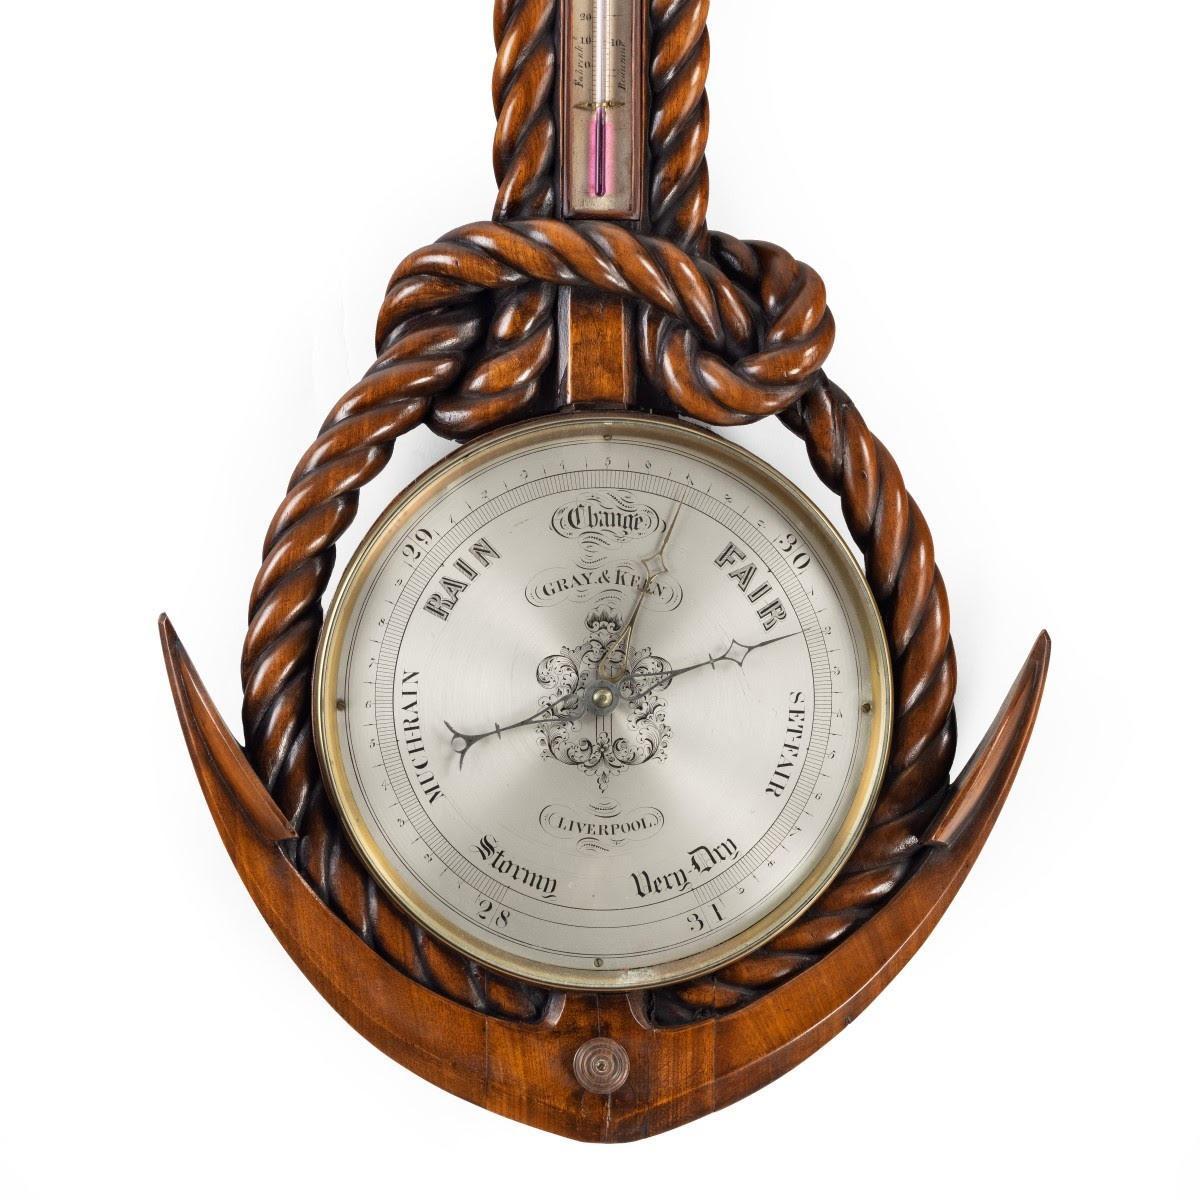 The 10 1/2-inch silvered dial of this walnut barometer is set within the arms of an anchor and coil of knotted rope which passes through a ring handle, the trunk inset with a thermometer, signed ‘Gray & Keen, Liverpool’. English, circa 1860.